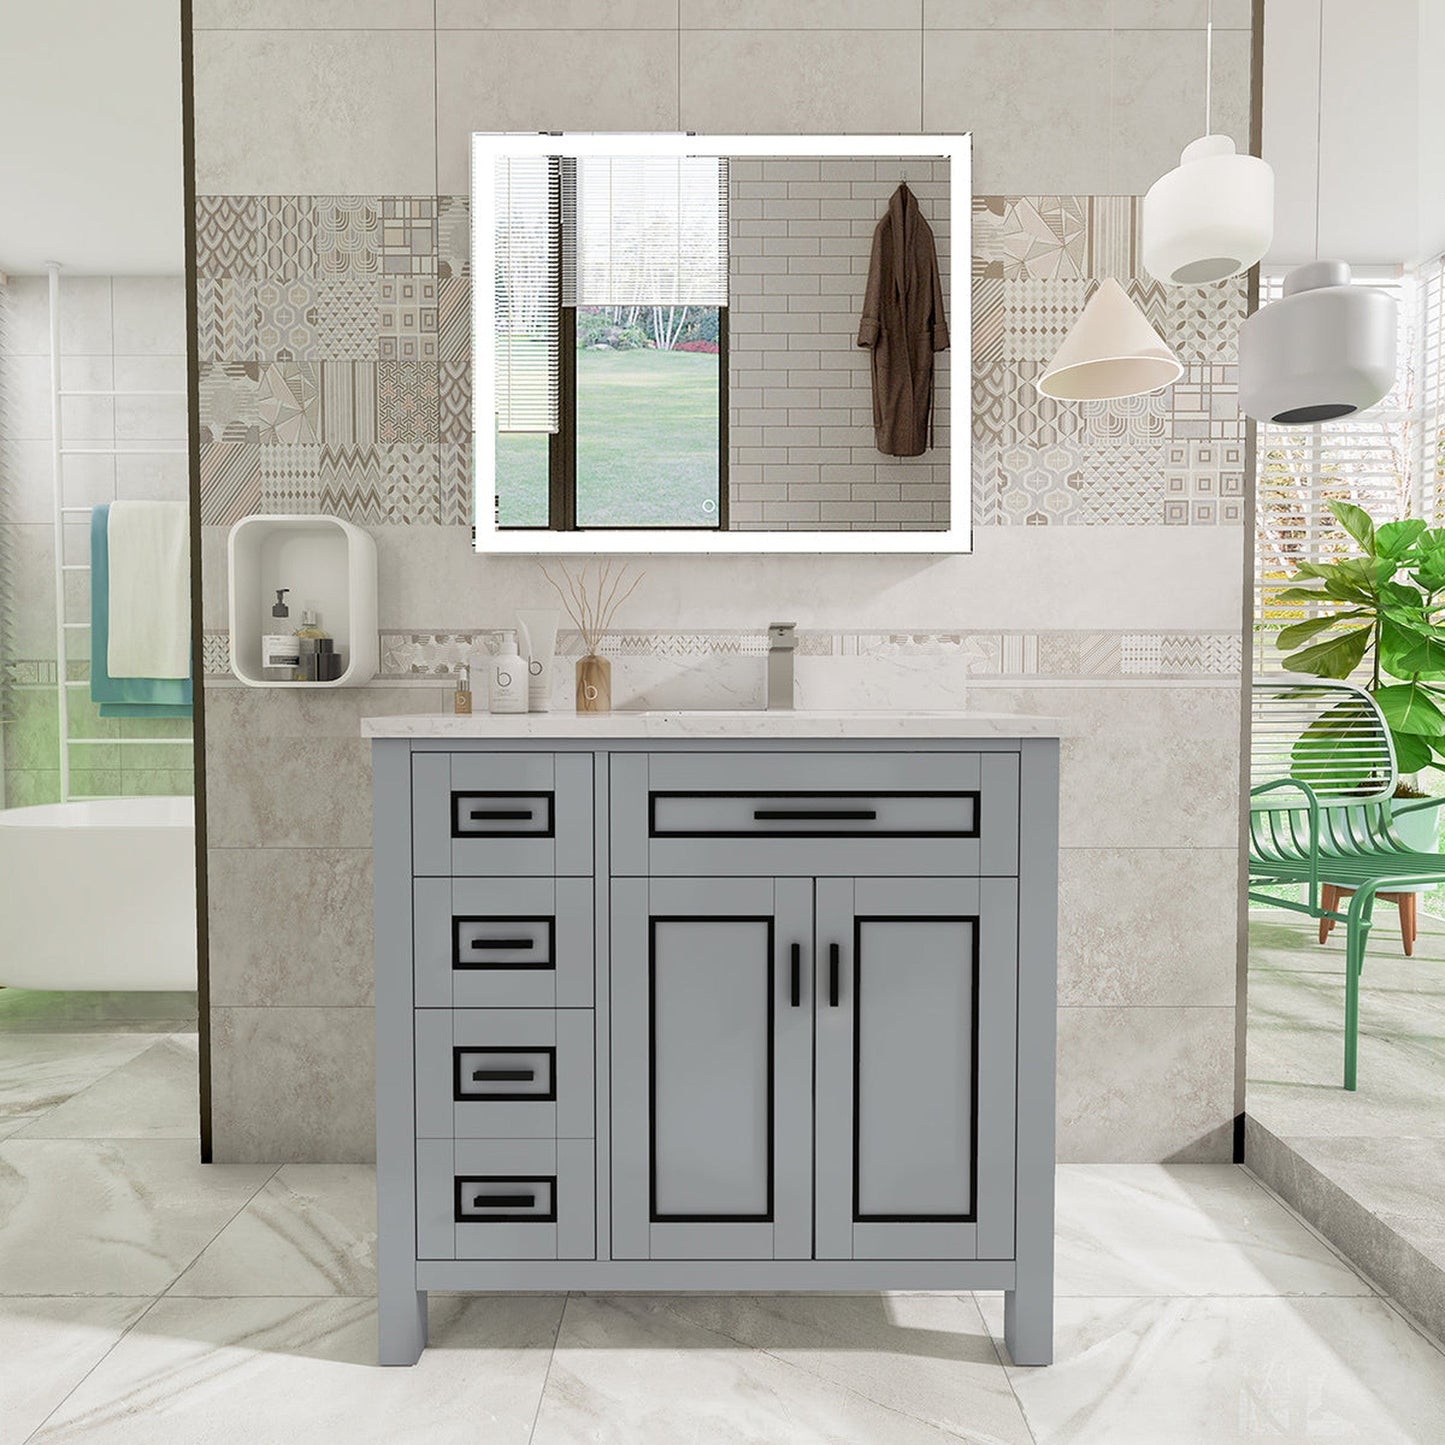 Duko Venice 36" With White Cararra Marble Tabletop, Rectangular Single Basin and Drawer Cabinet Gray Wooden Vanity Set